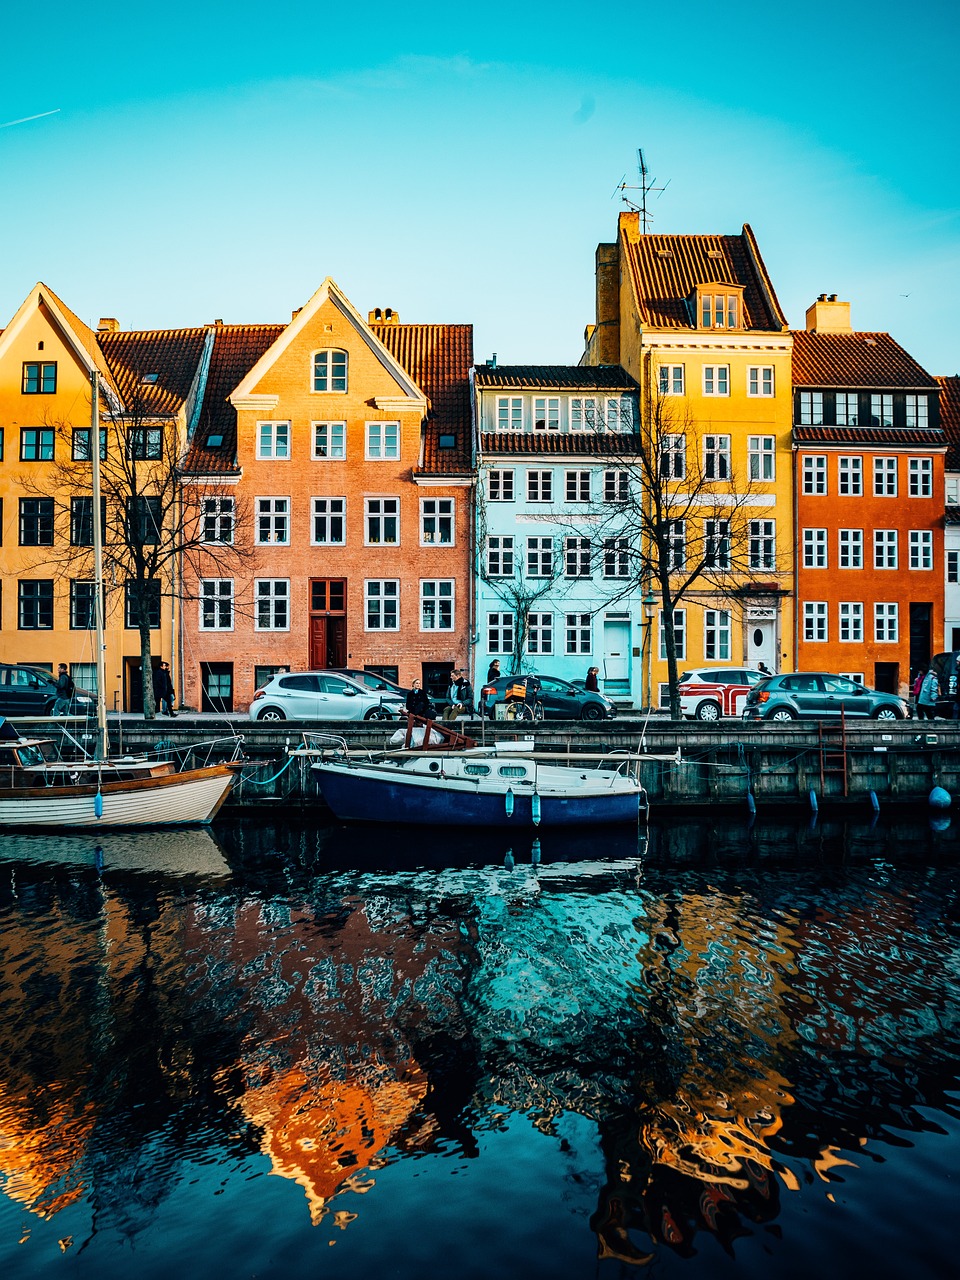 6-Day Adventure in Denmark and Beyond